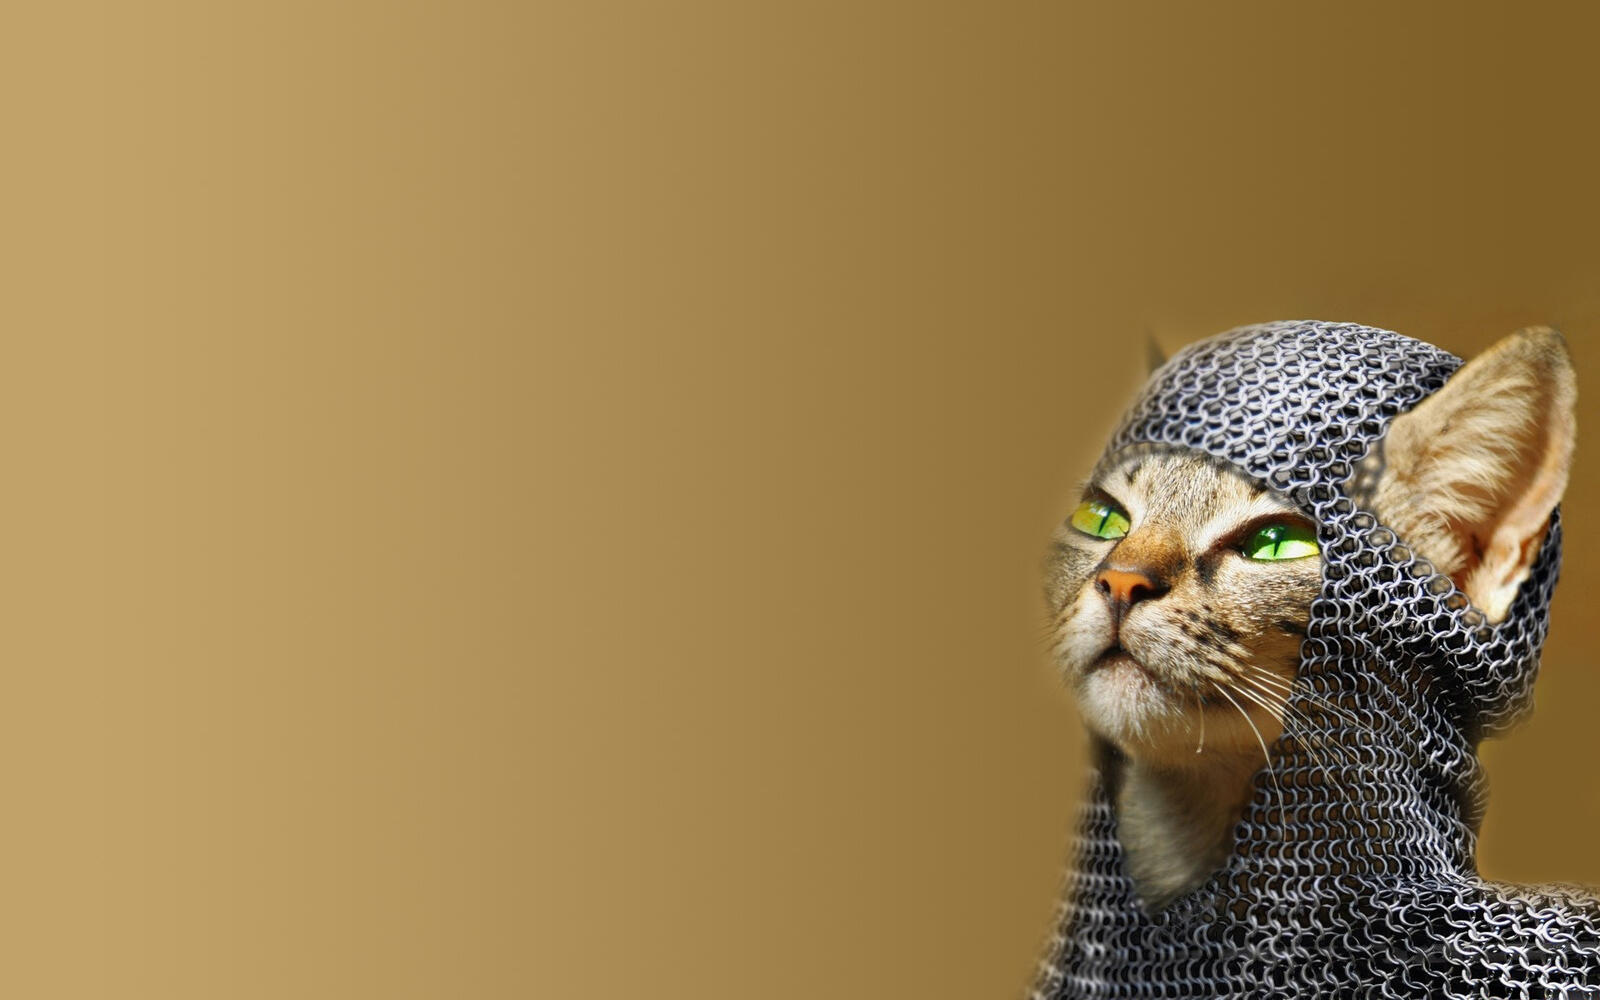 Wallpapers cat knight armor on the desktop